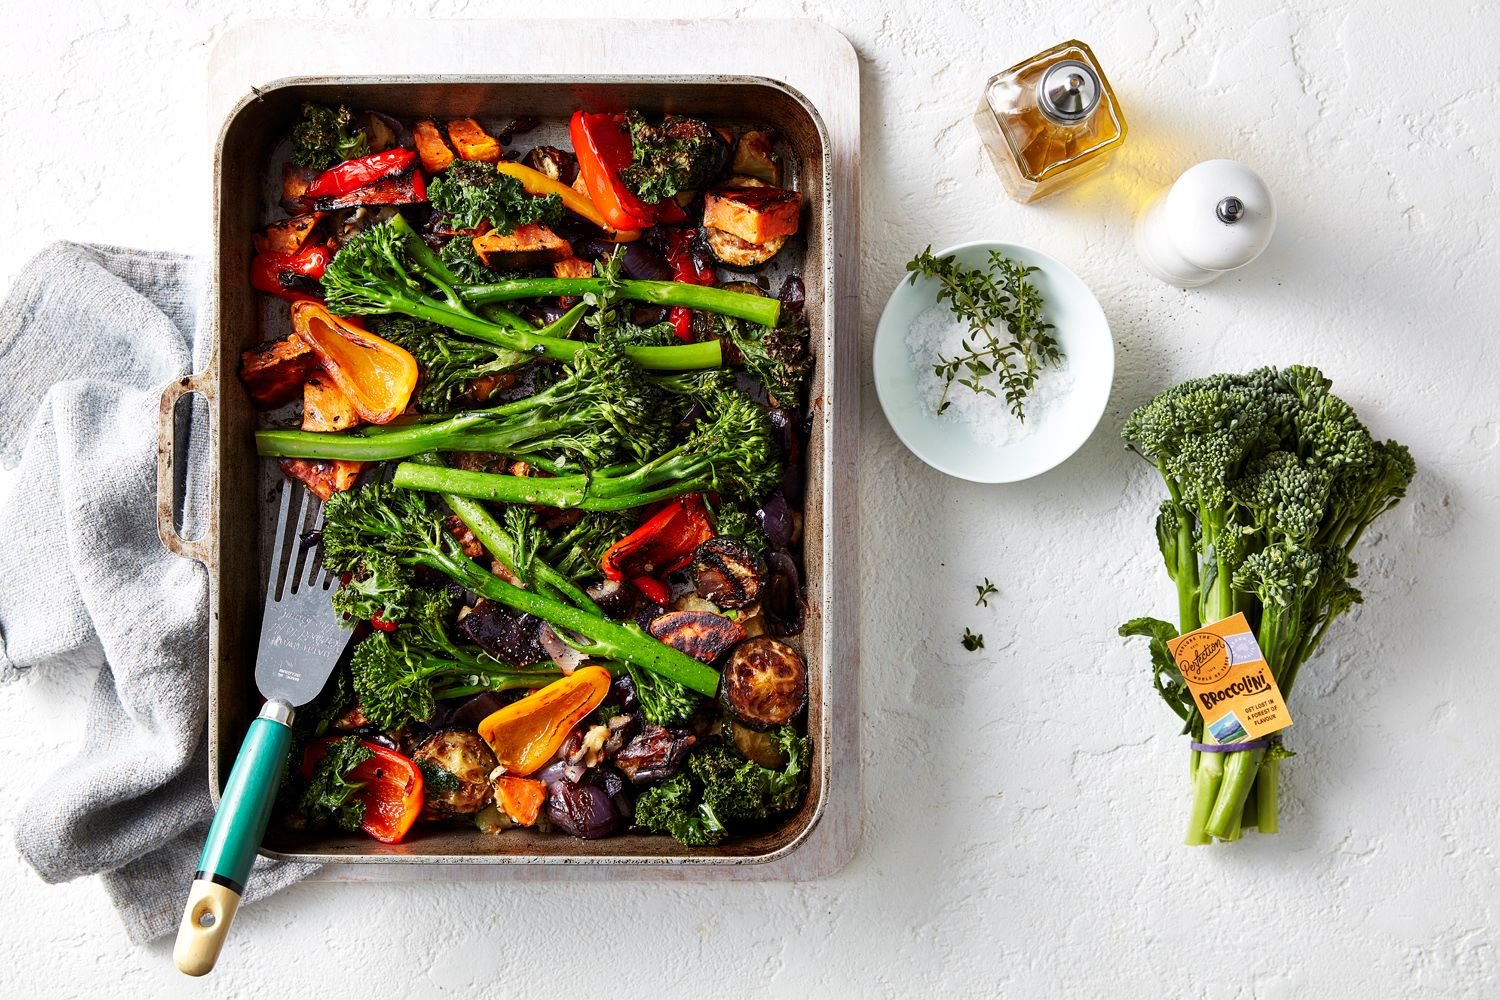 A roasting tray with roasted vegetables that include Broccolini, mini capsicums, onion, zucchini.